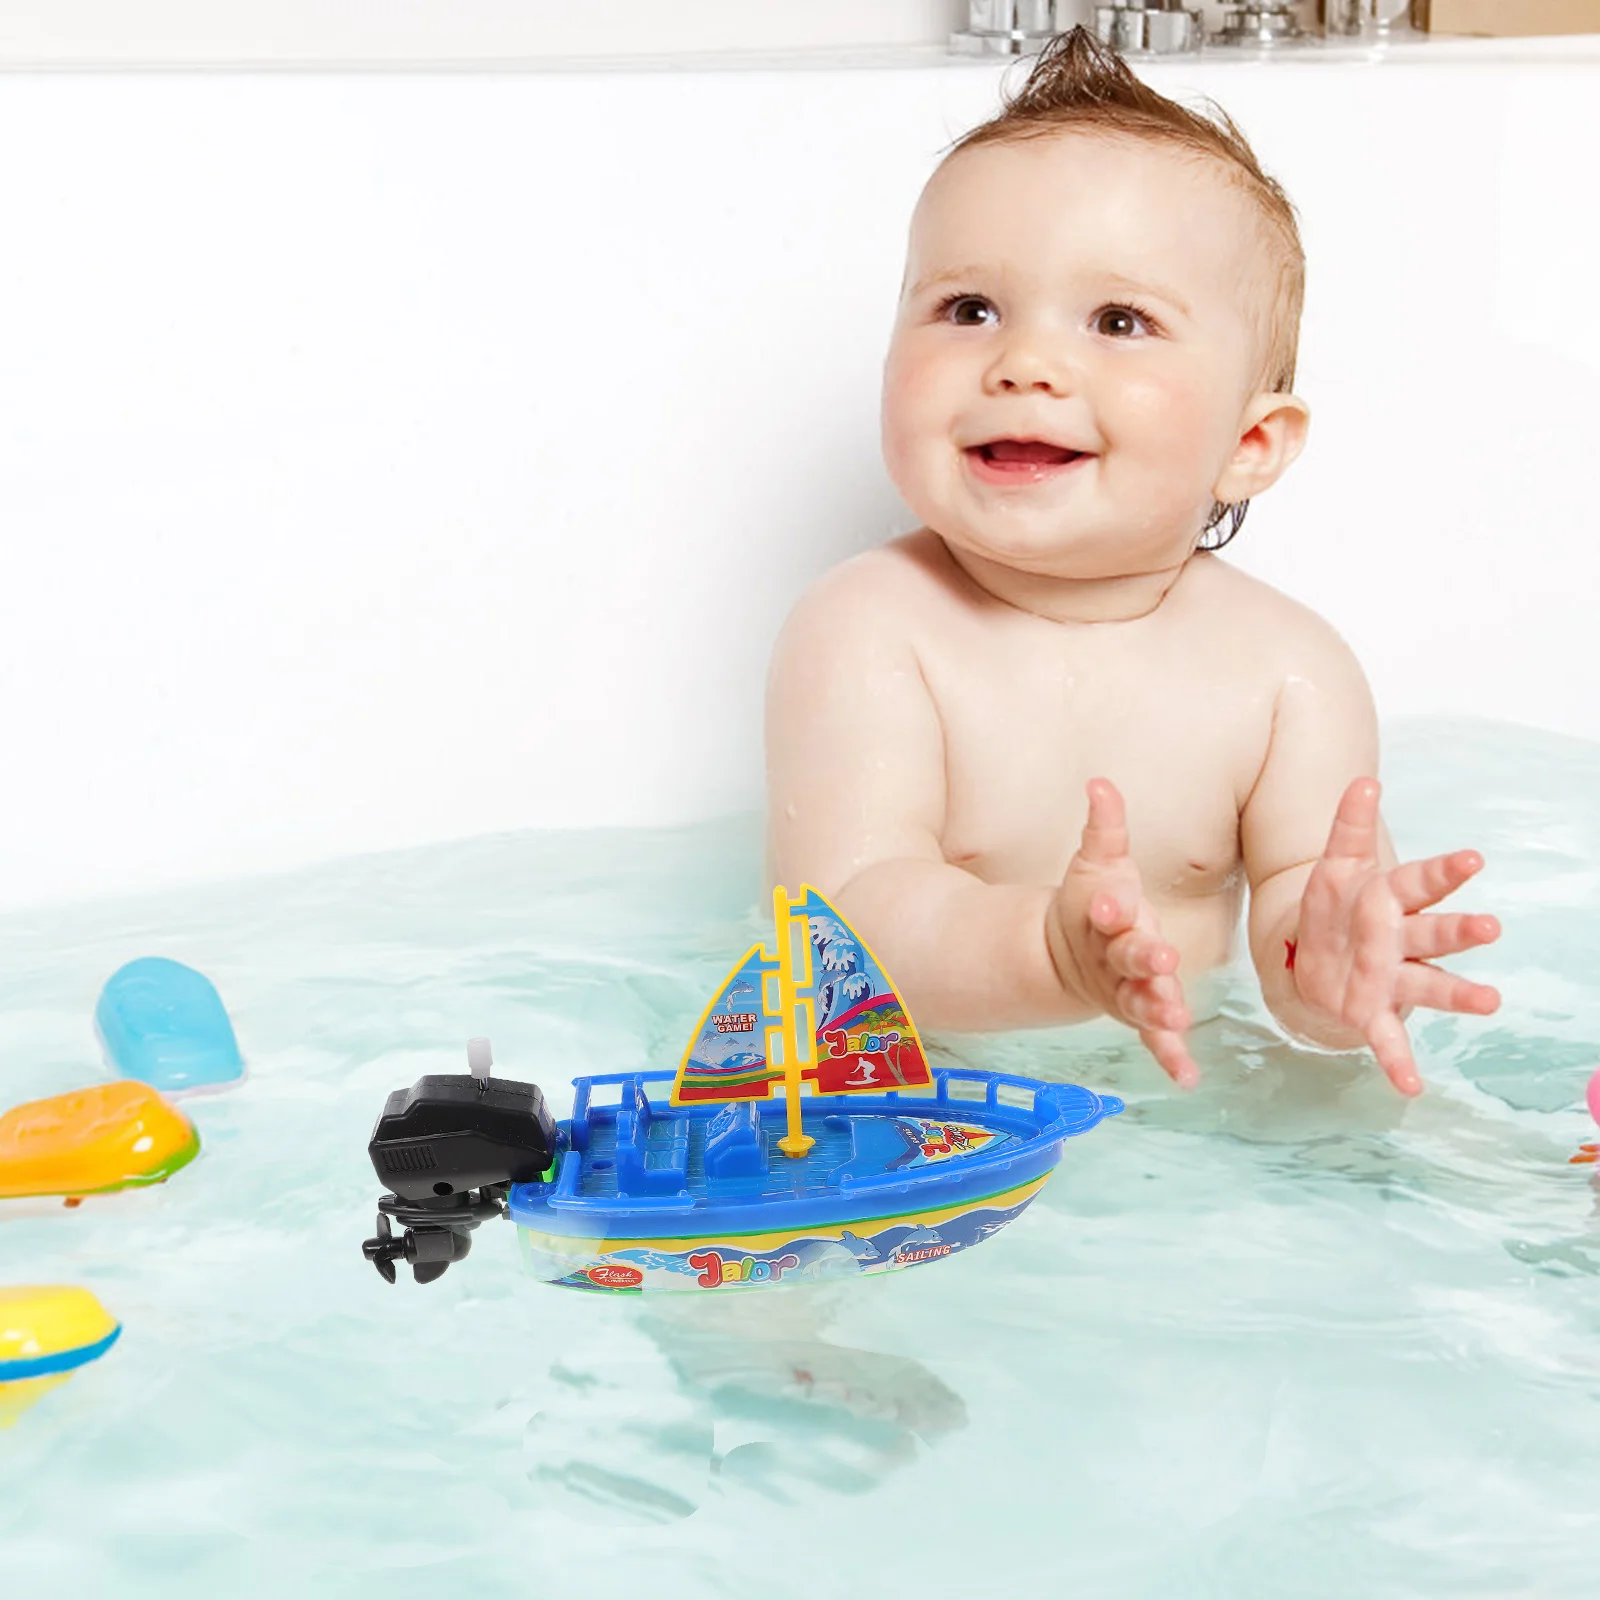 

2Pcs Bath Toy Little Boat Wind-up Toy Water Sprayer Toy Plastic Tugboats for Bathtub (Random Color)